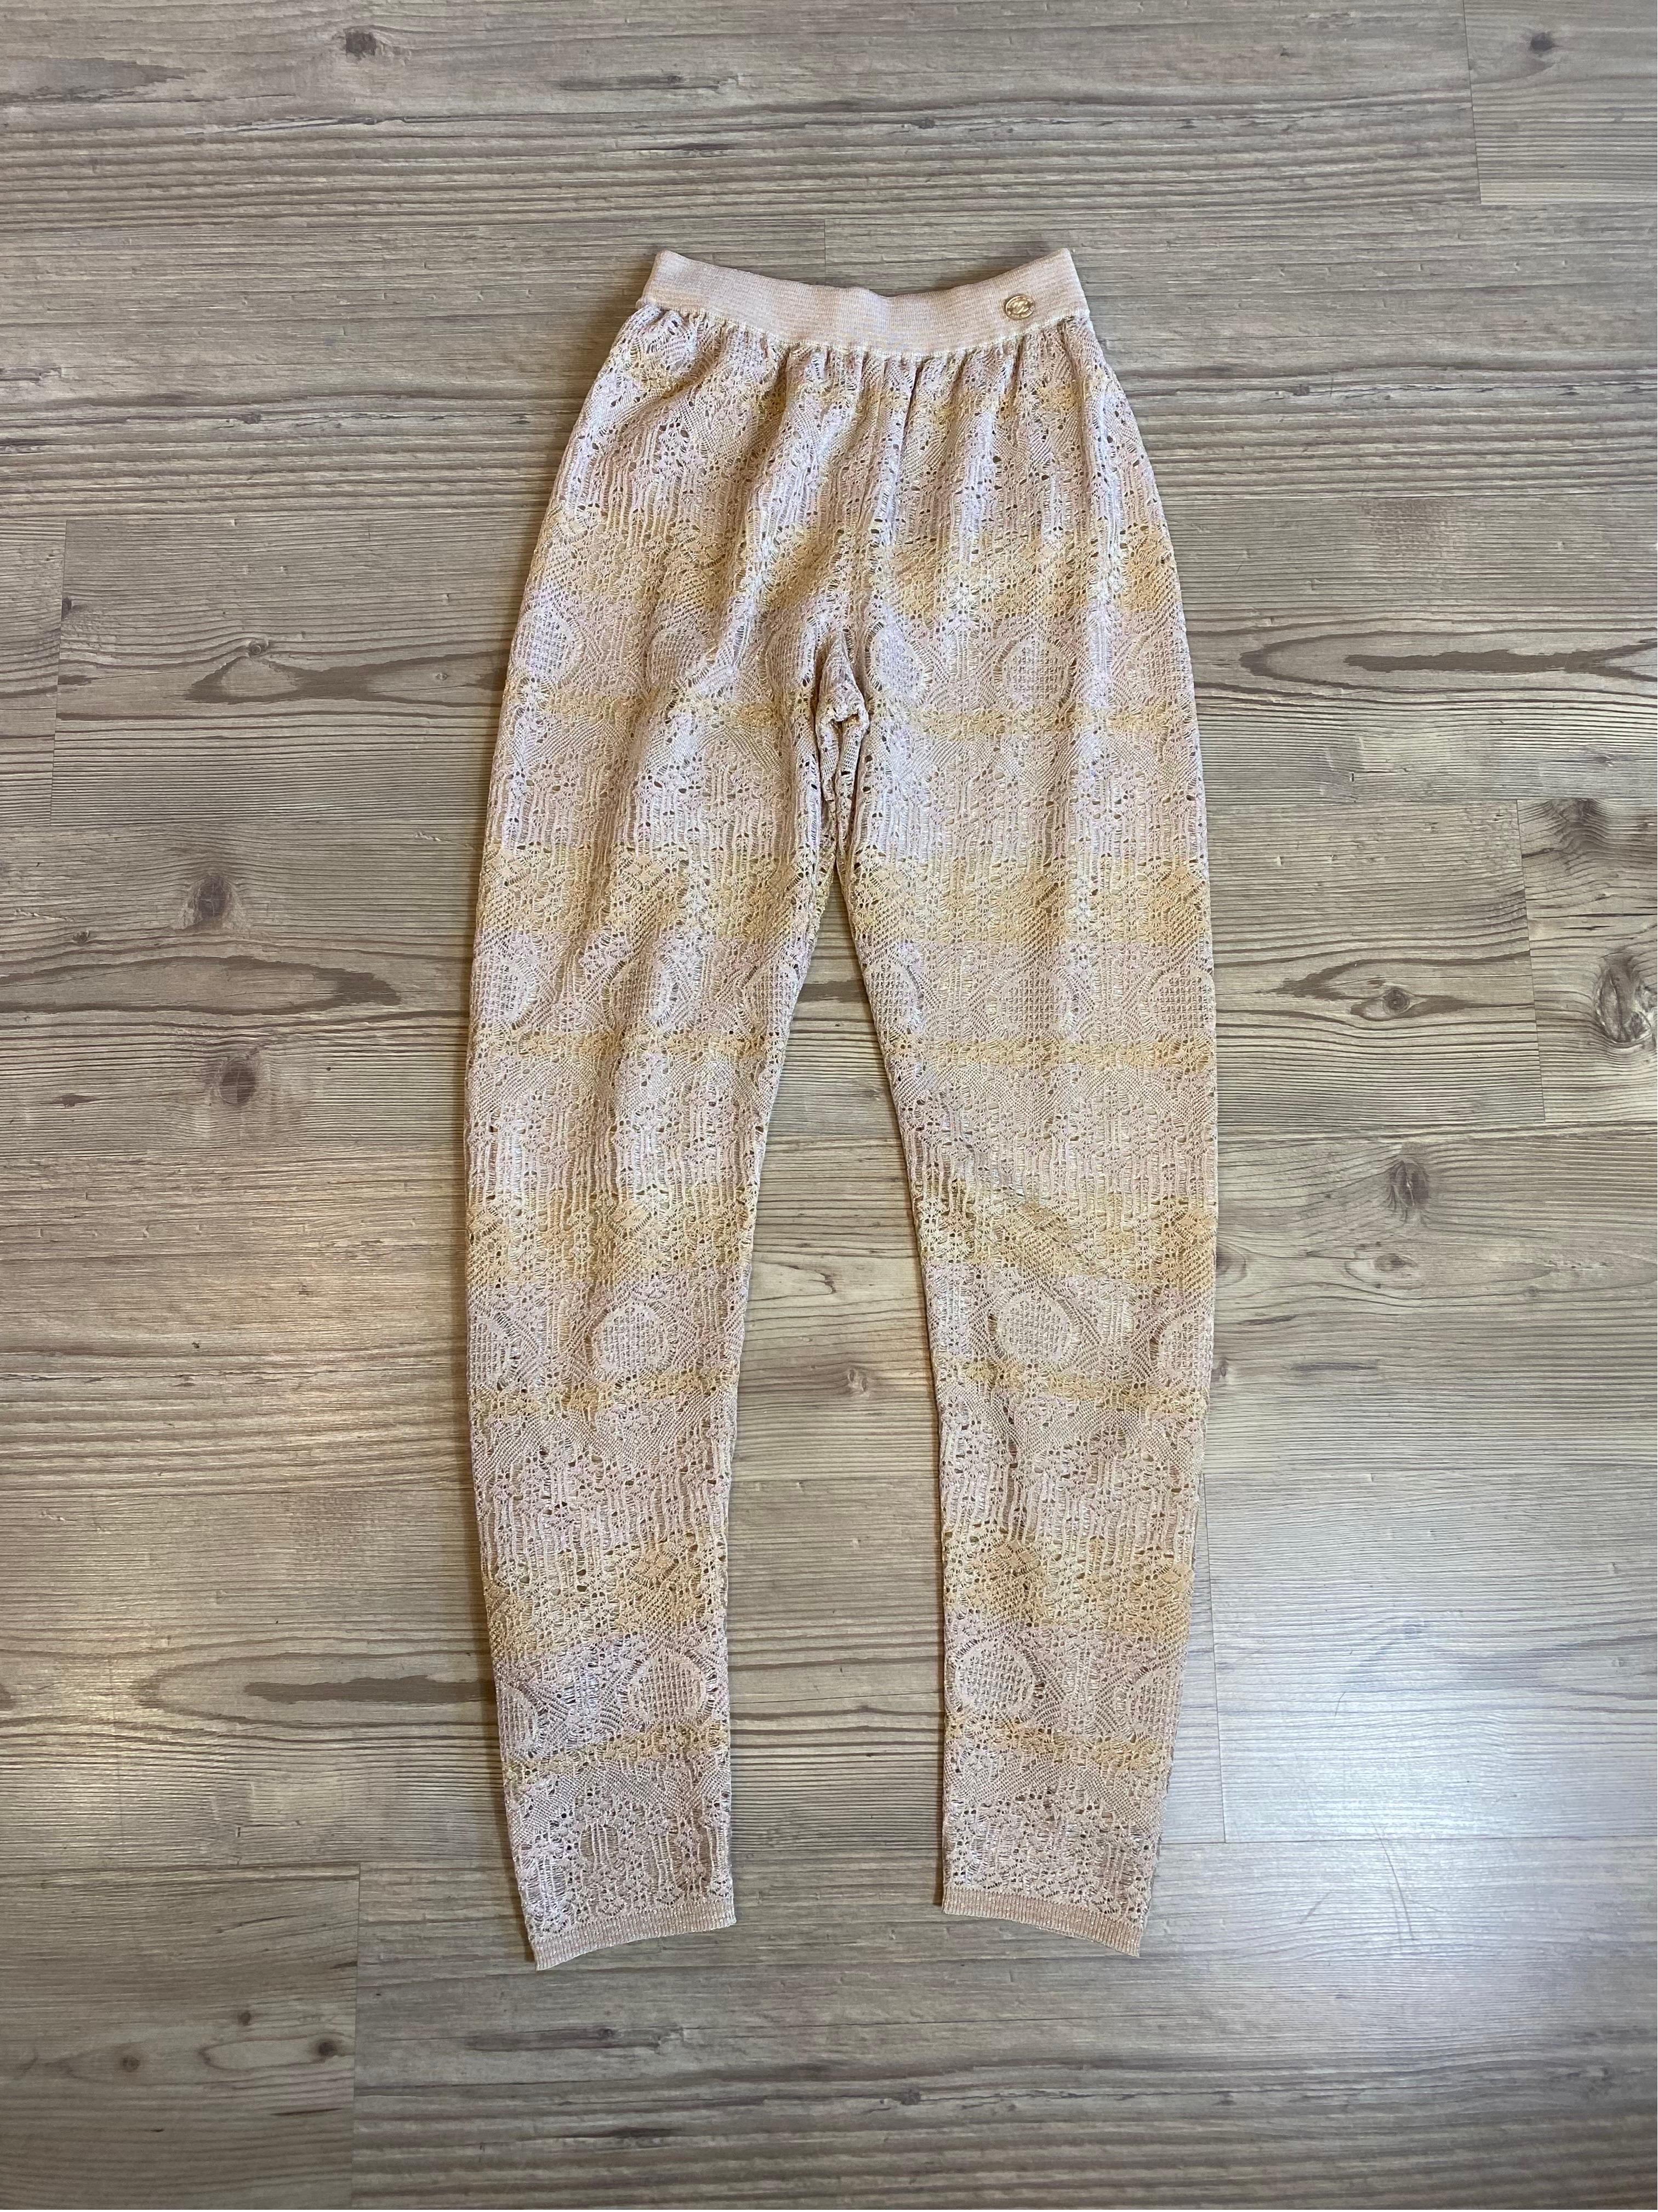 Chanel trousers
In viscose and lurex.
Lined in silk and elastane.
French size 36 which corresponds to an Italian 40.
27cm waist (elastic)
100 cm length 
Excellent general condition, like new.